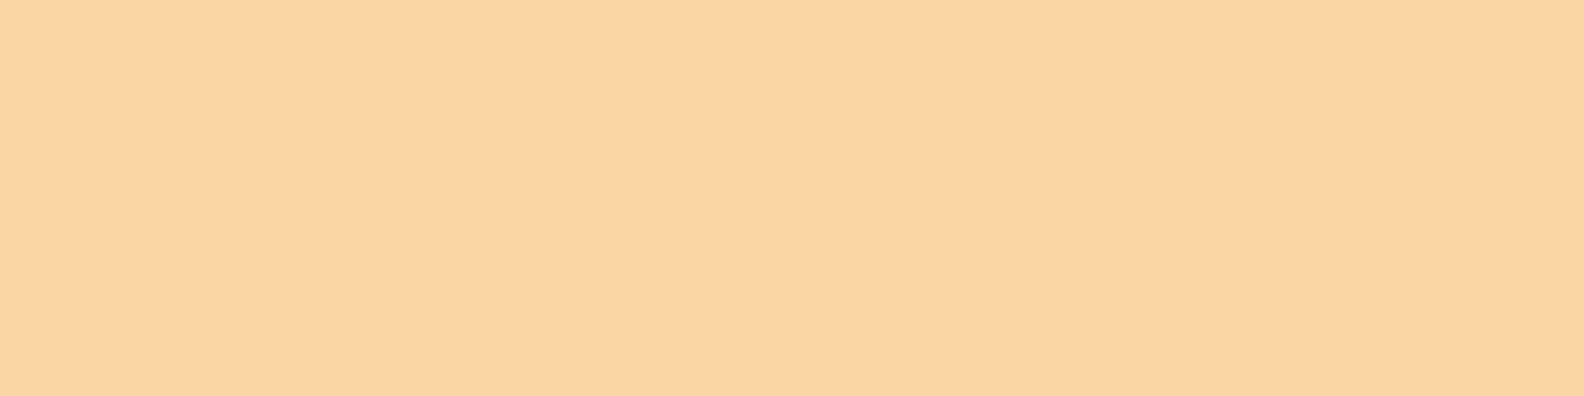 1584x396 Deep Champagne Solid Color Background